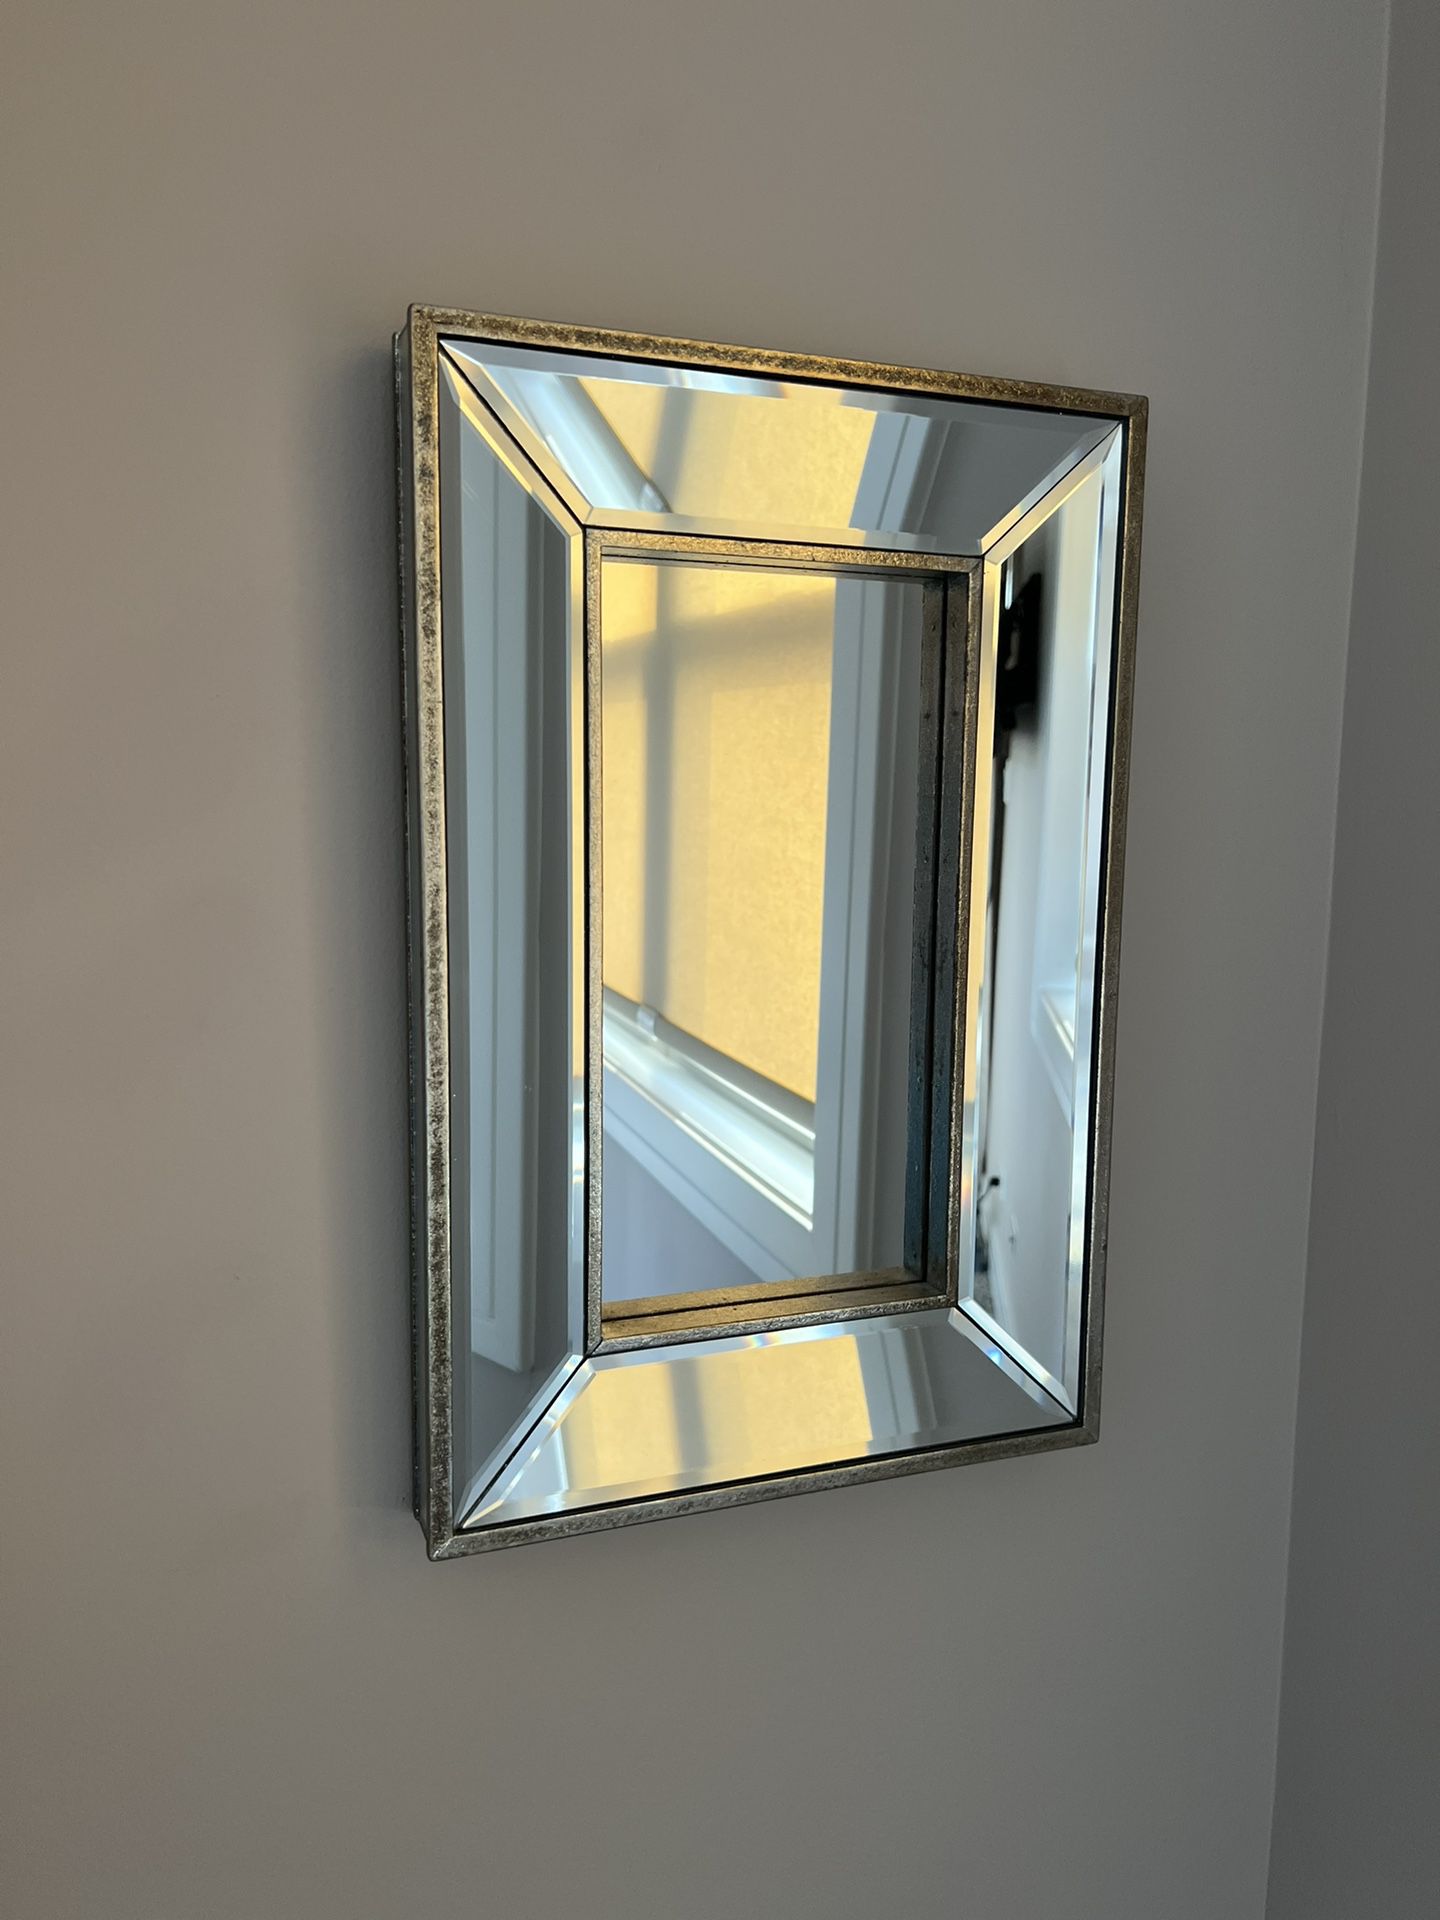 2 NEW MIRRORS TOP QUALITY 18”X12”